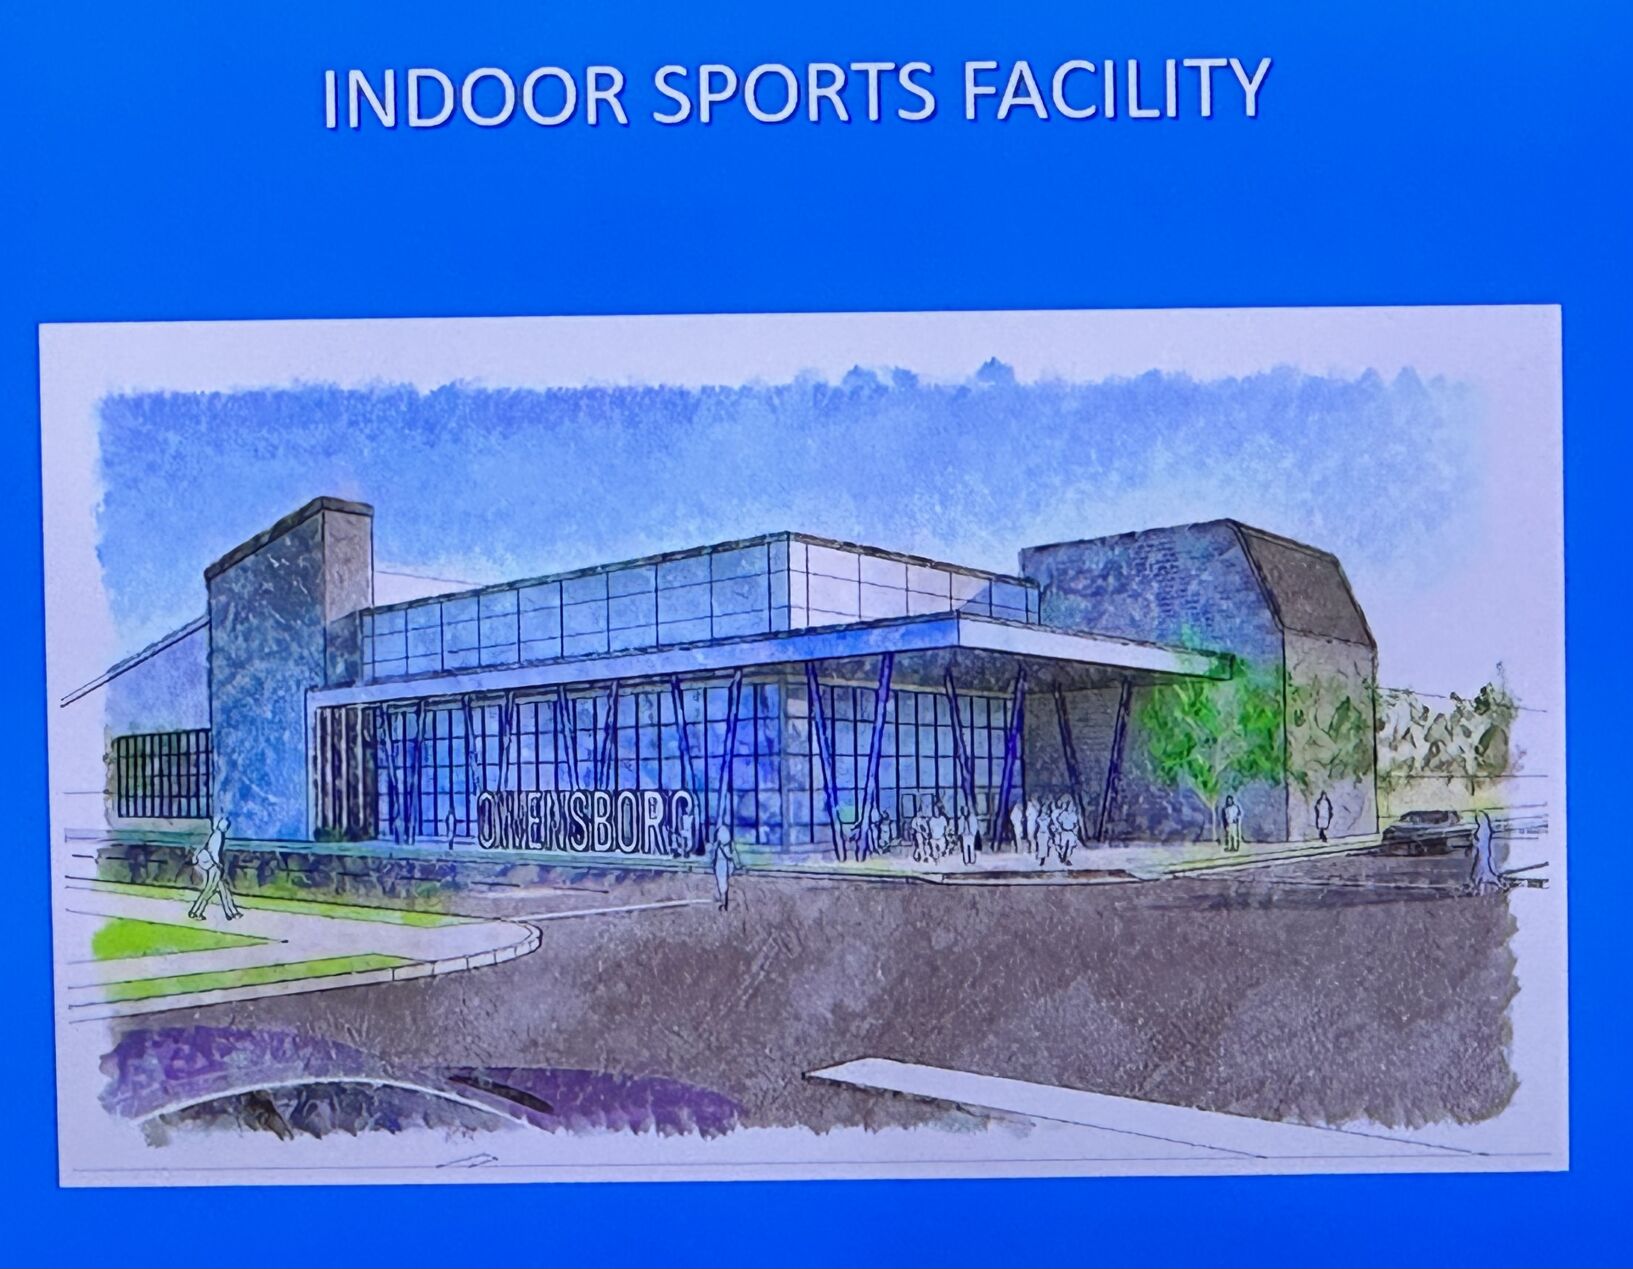 Plans move forward for the indoor sports facility in Owensboro News wevv